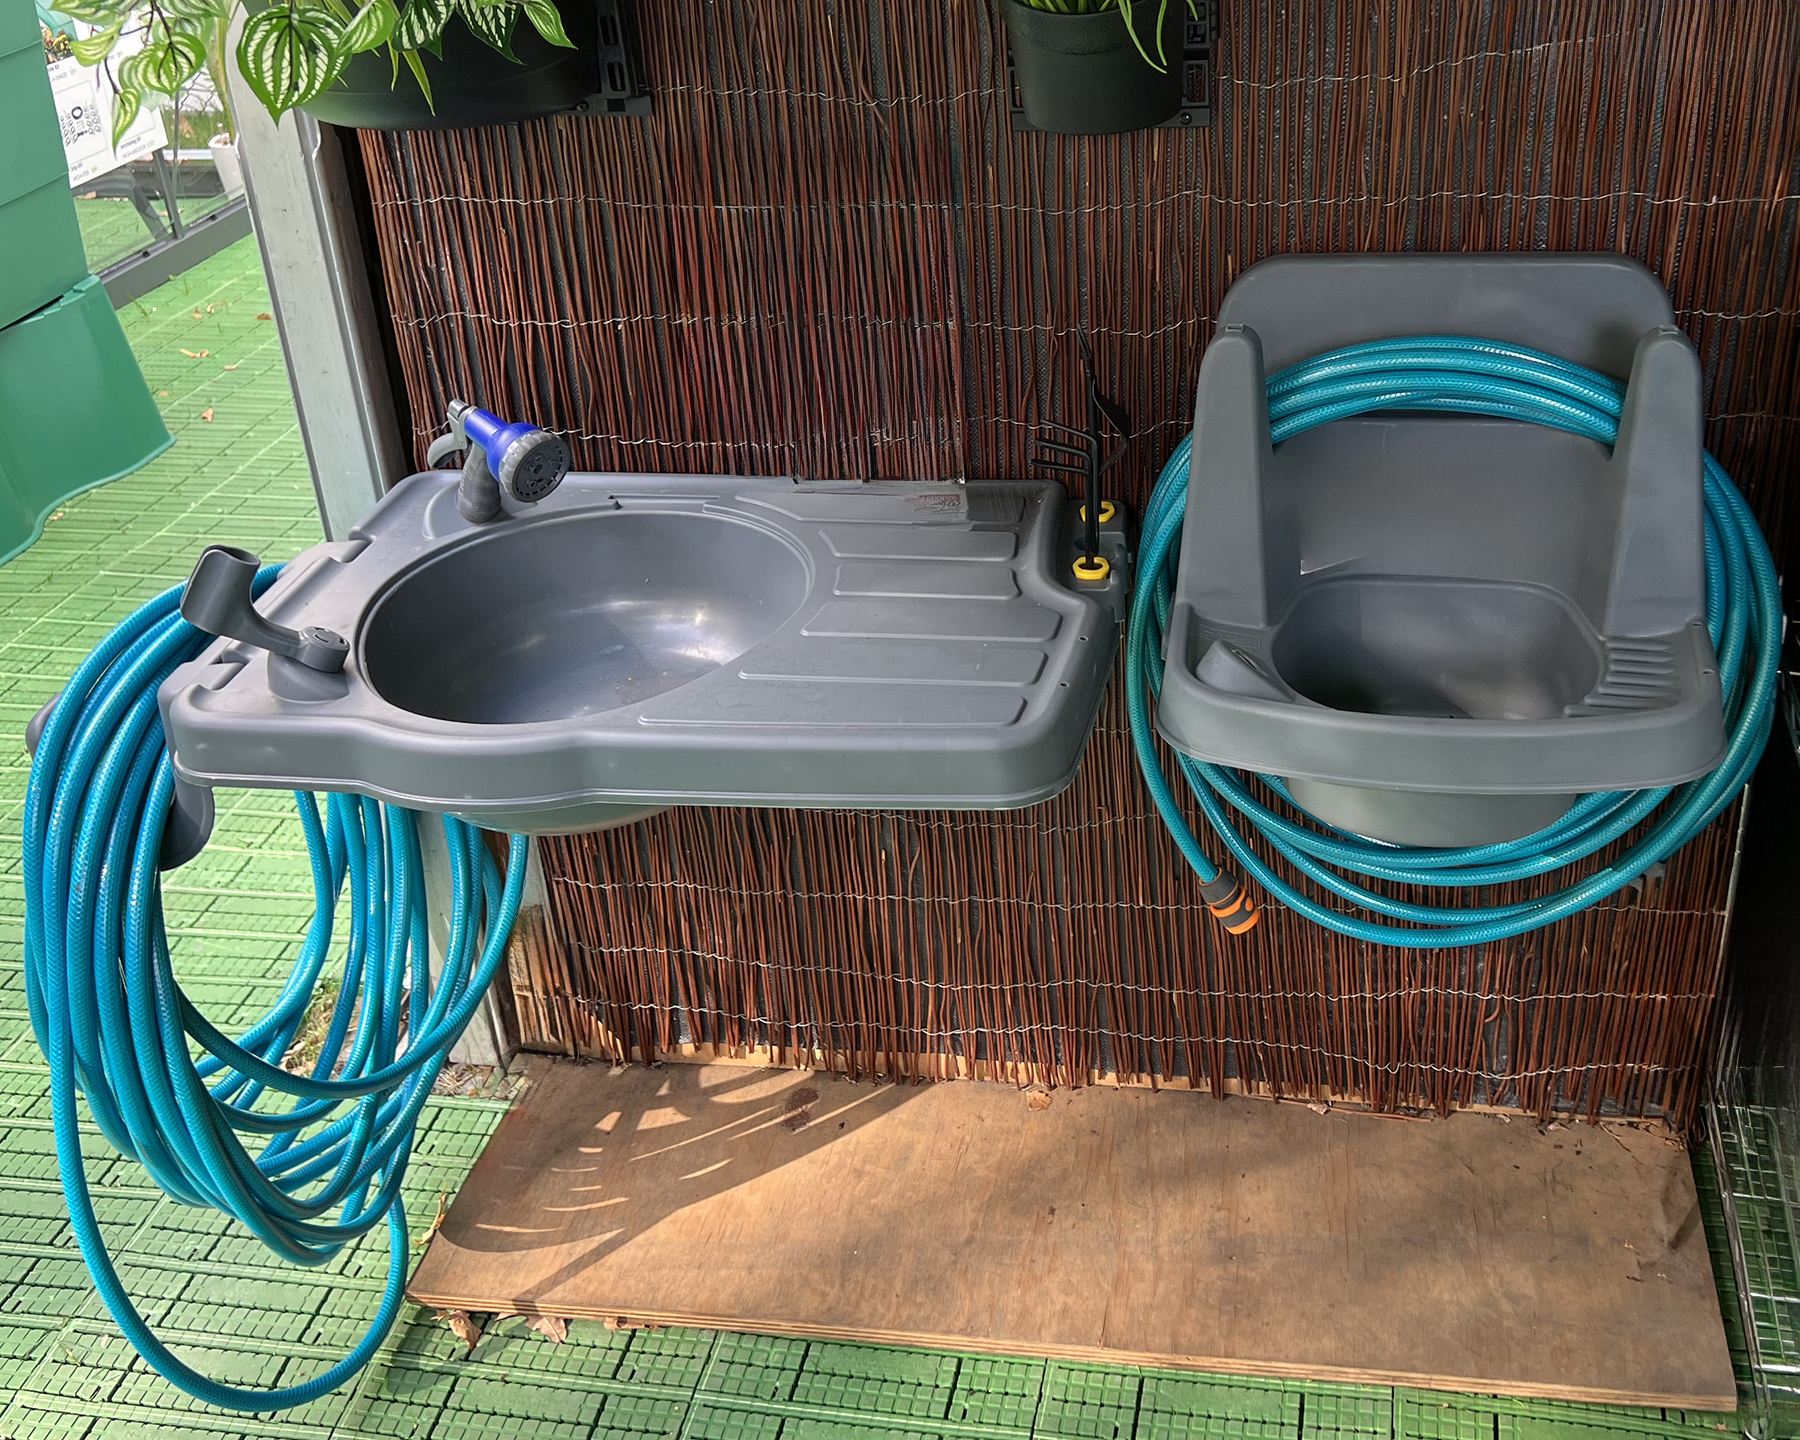 Outdoor sinks and hose storage Large (L) and Samll (R)